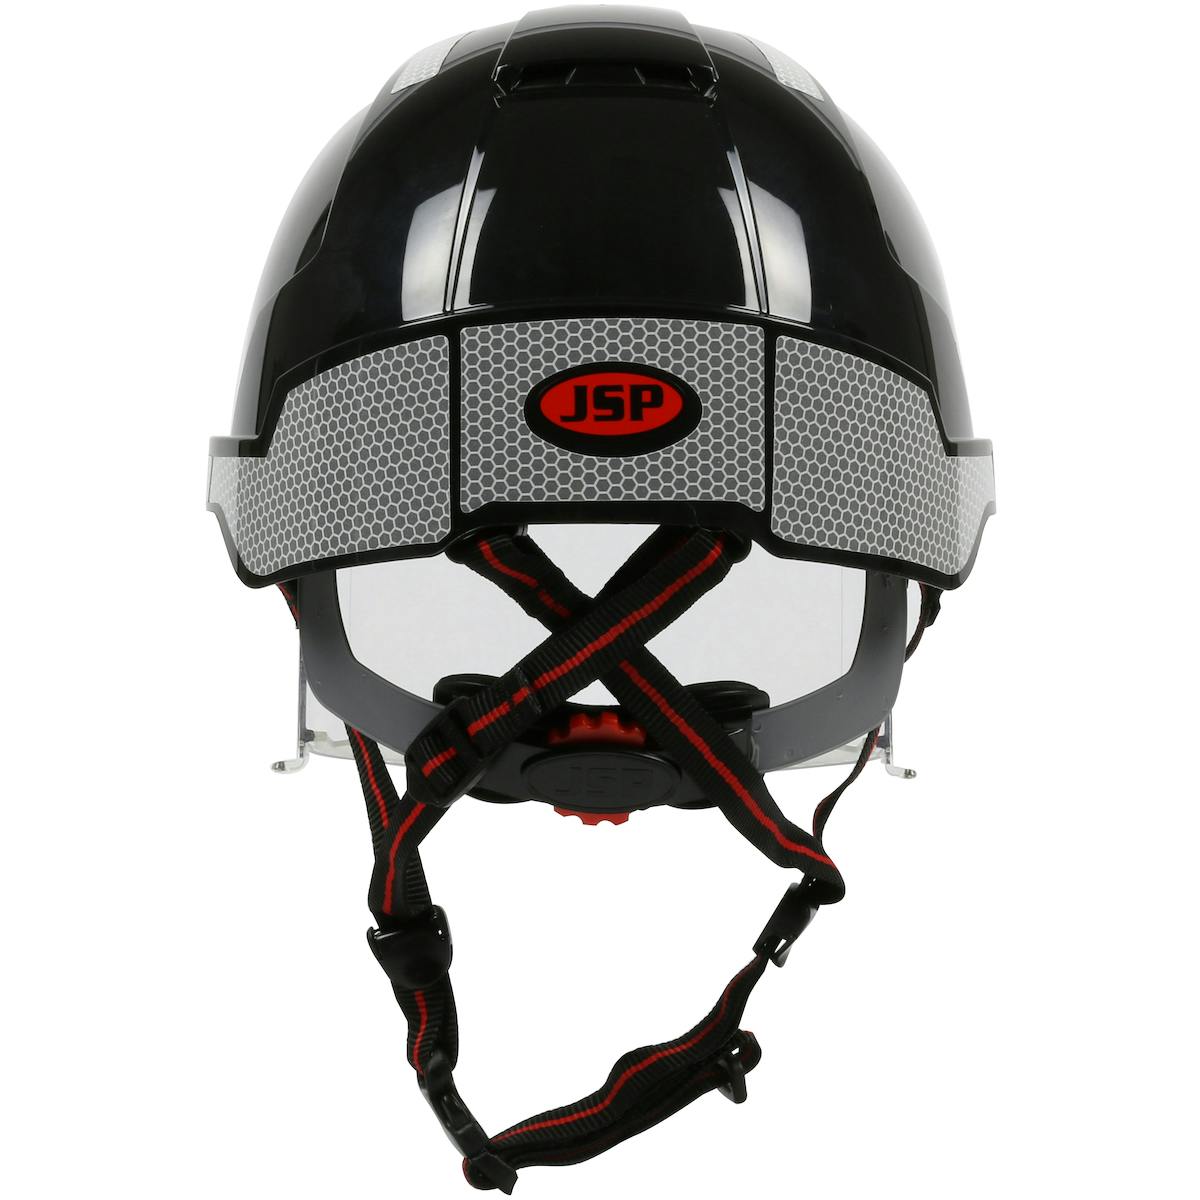 EVO® VISTA™ ASCEND™ Type I, Vented Industrial Safety Helmet with fully adjustable four point chinstrap, Lightweight ABS Shell, Integrated ANSI Z87.1 Eye Protection, 6-Point Polyester Suspension and Wheel Ratchet Adjustment (280-EVLV-CH)